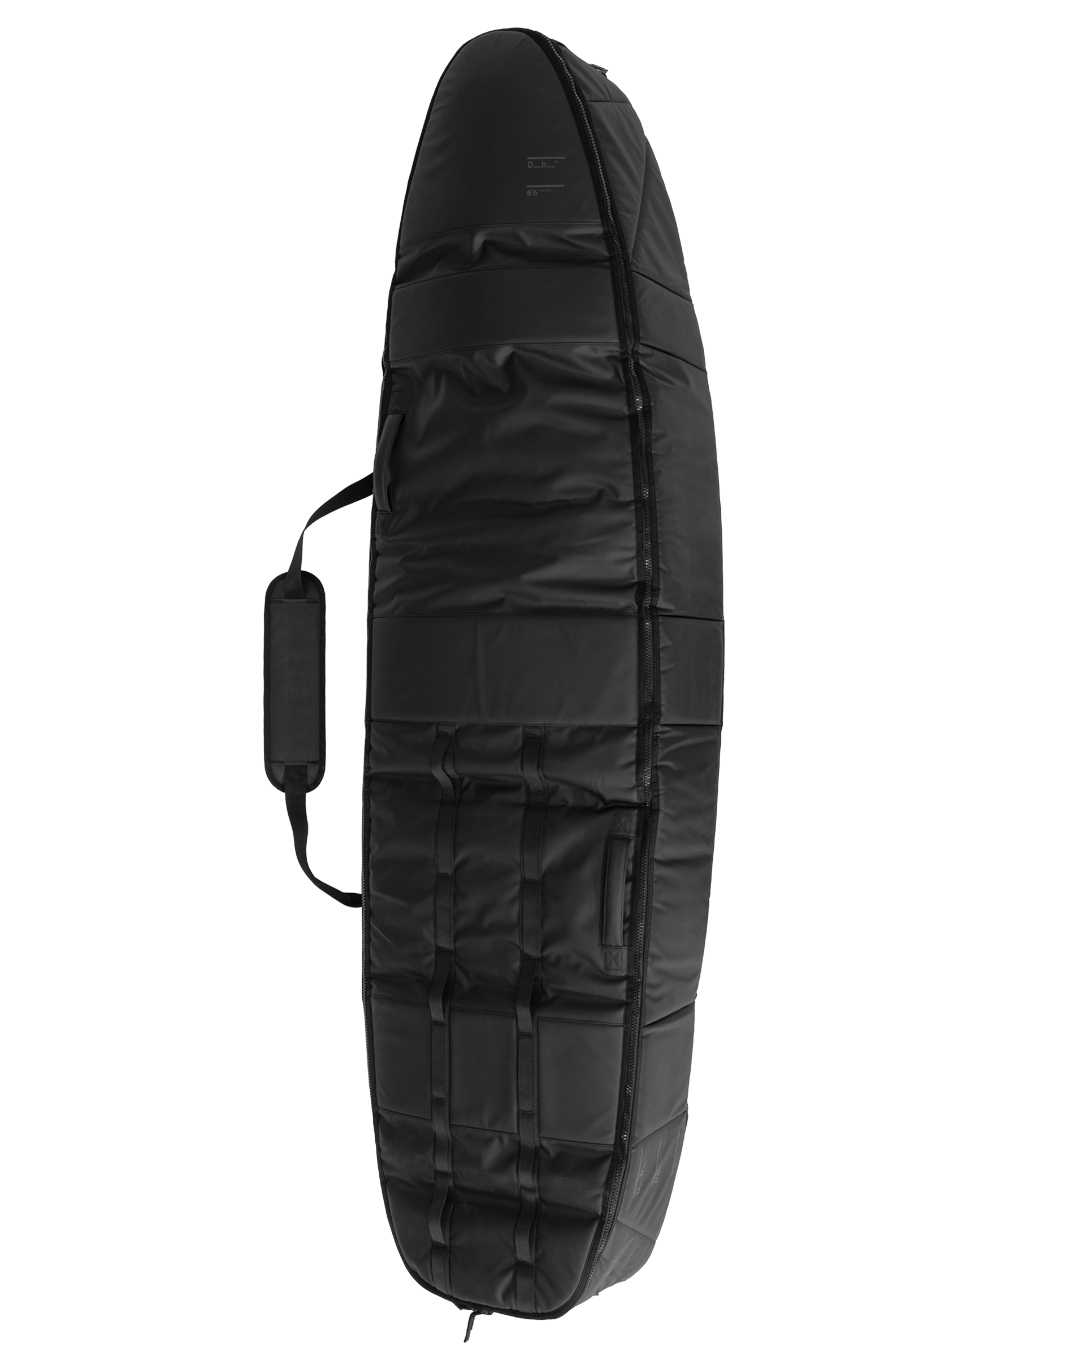 Surf Pro Coffin 3-4 Boards_black_2_lowres.png